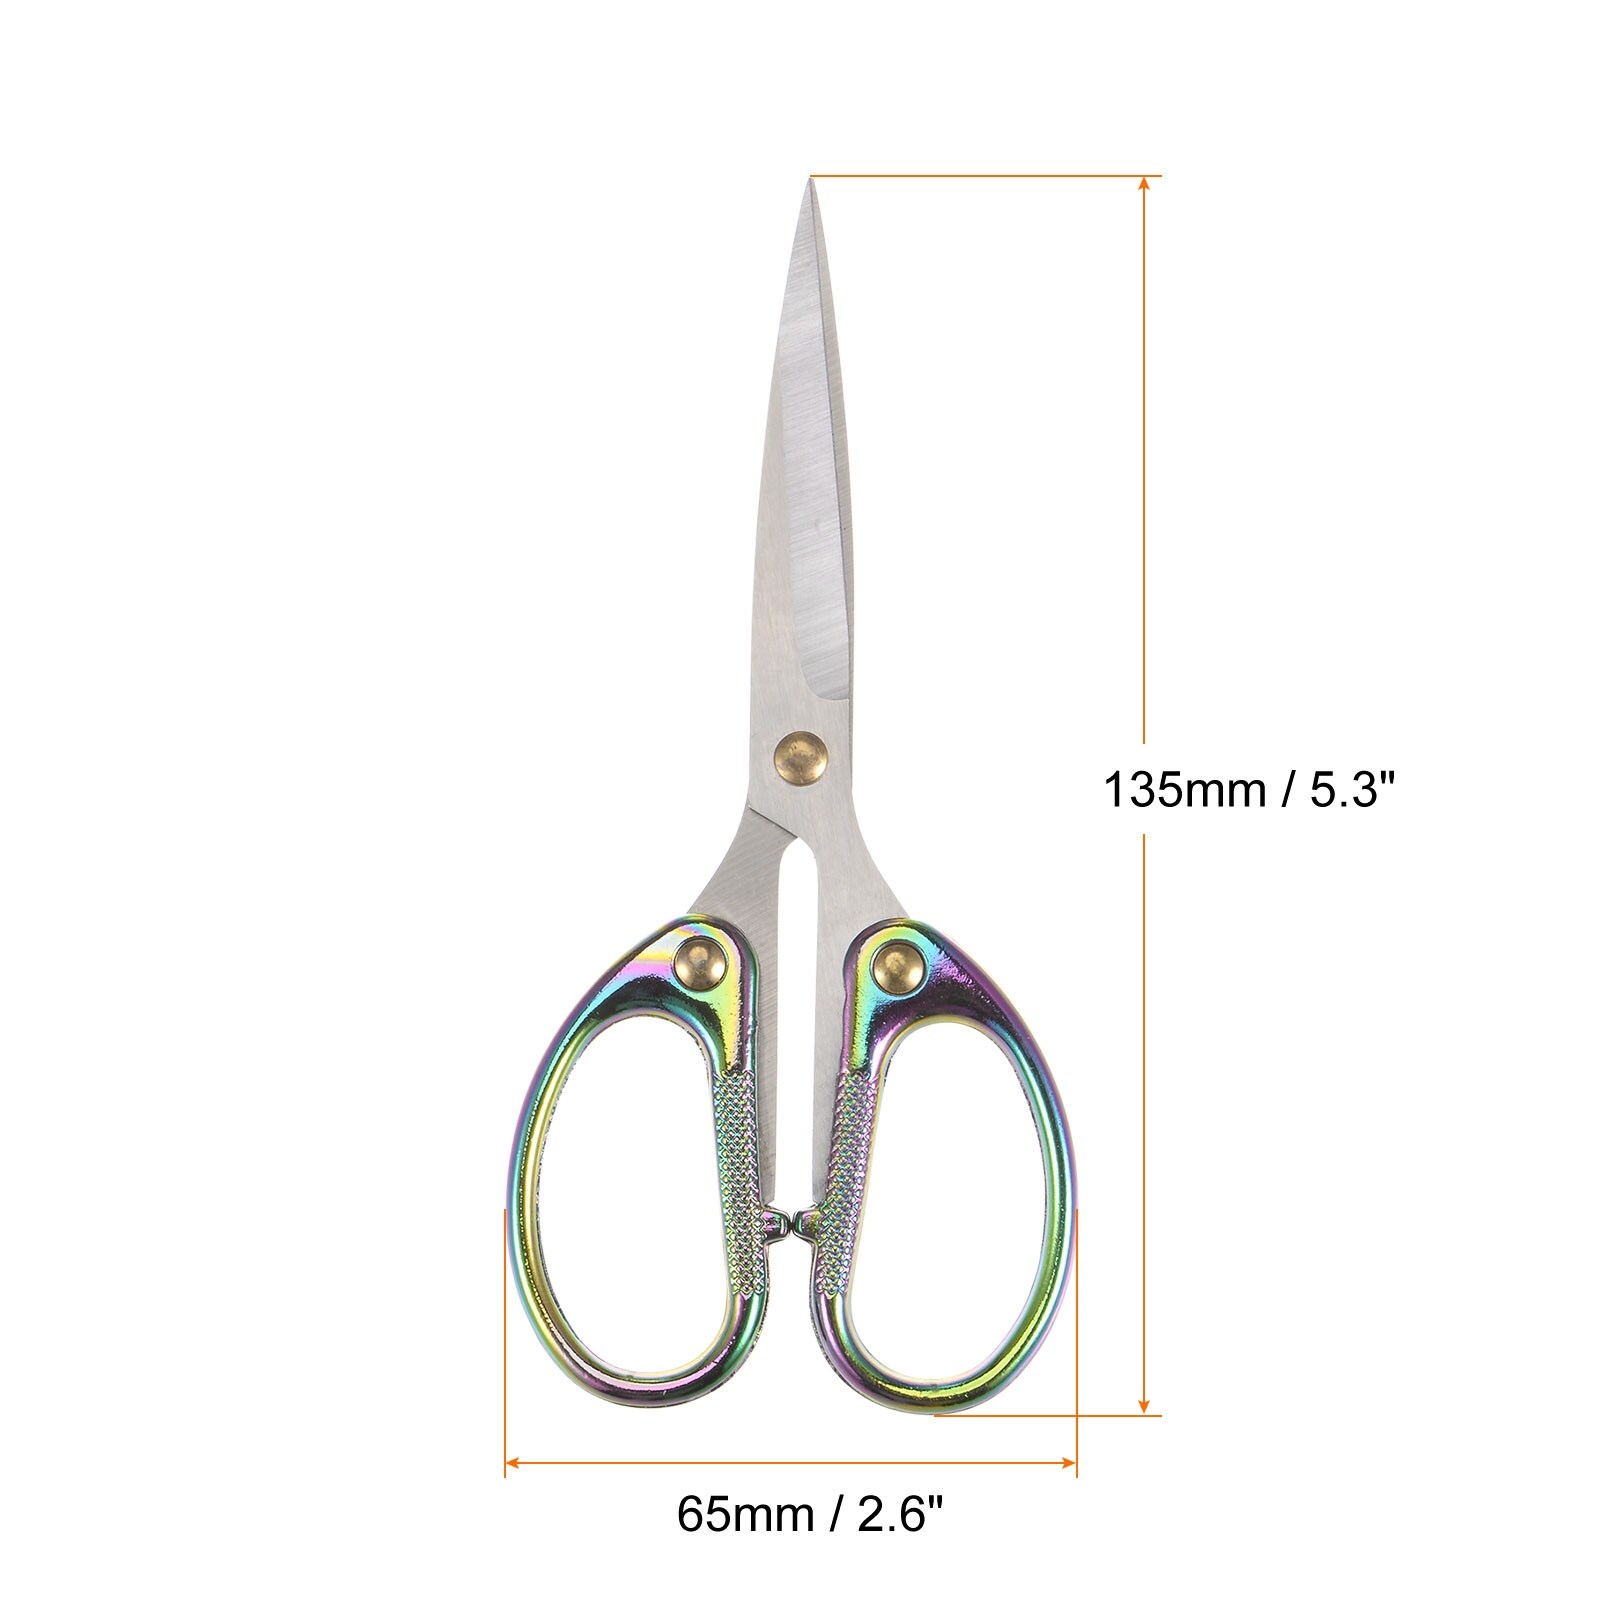 5.3 Stainless Steel Vintage Scissors for Embroidery Sewing Craft Copper Tone - Copper Tone